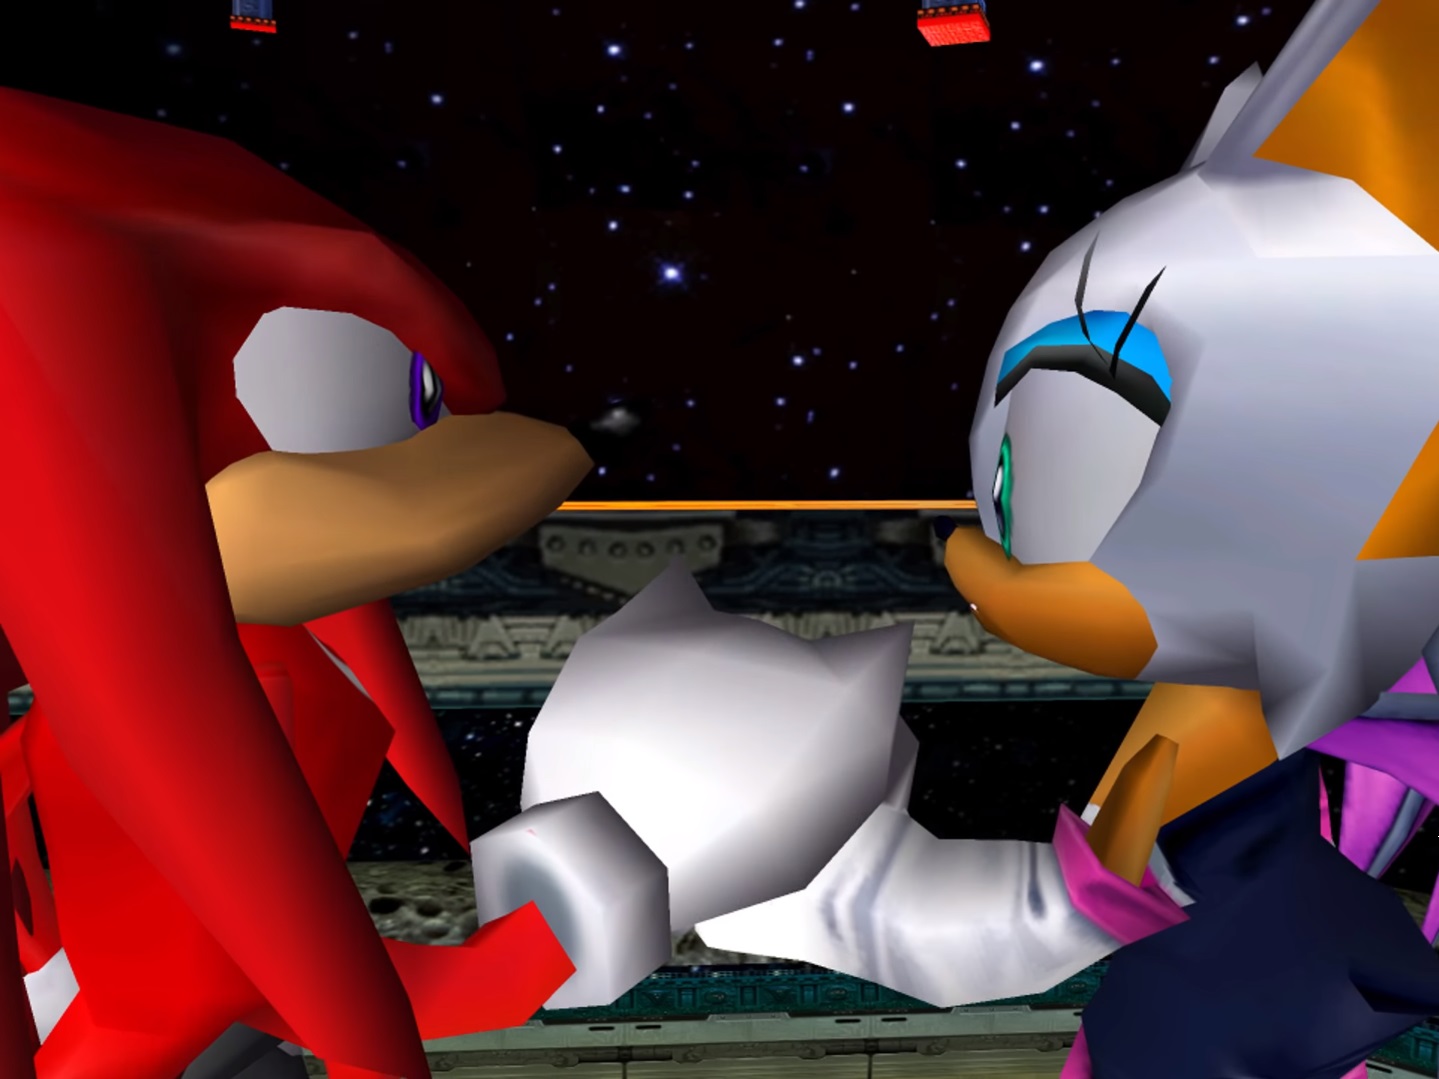 sonic and rouge in love